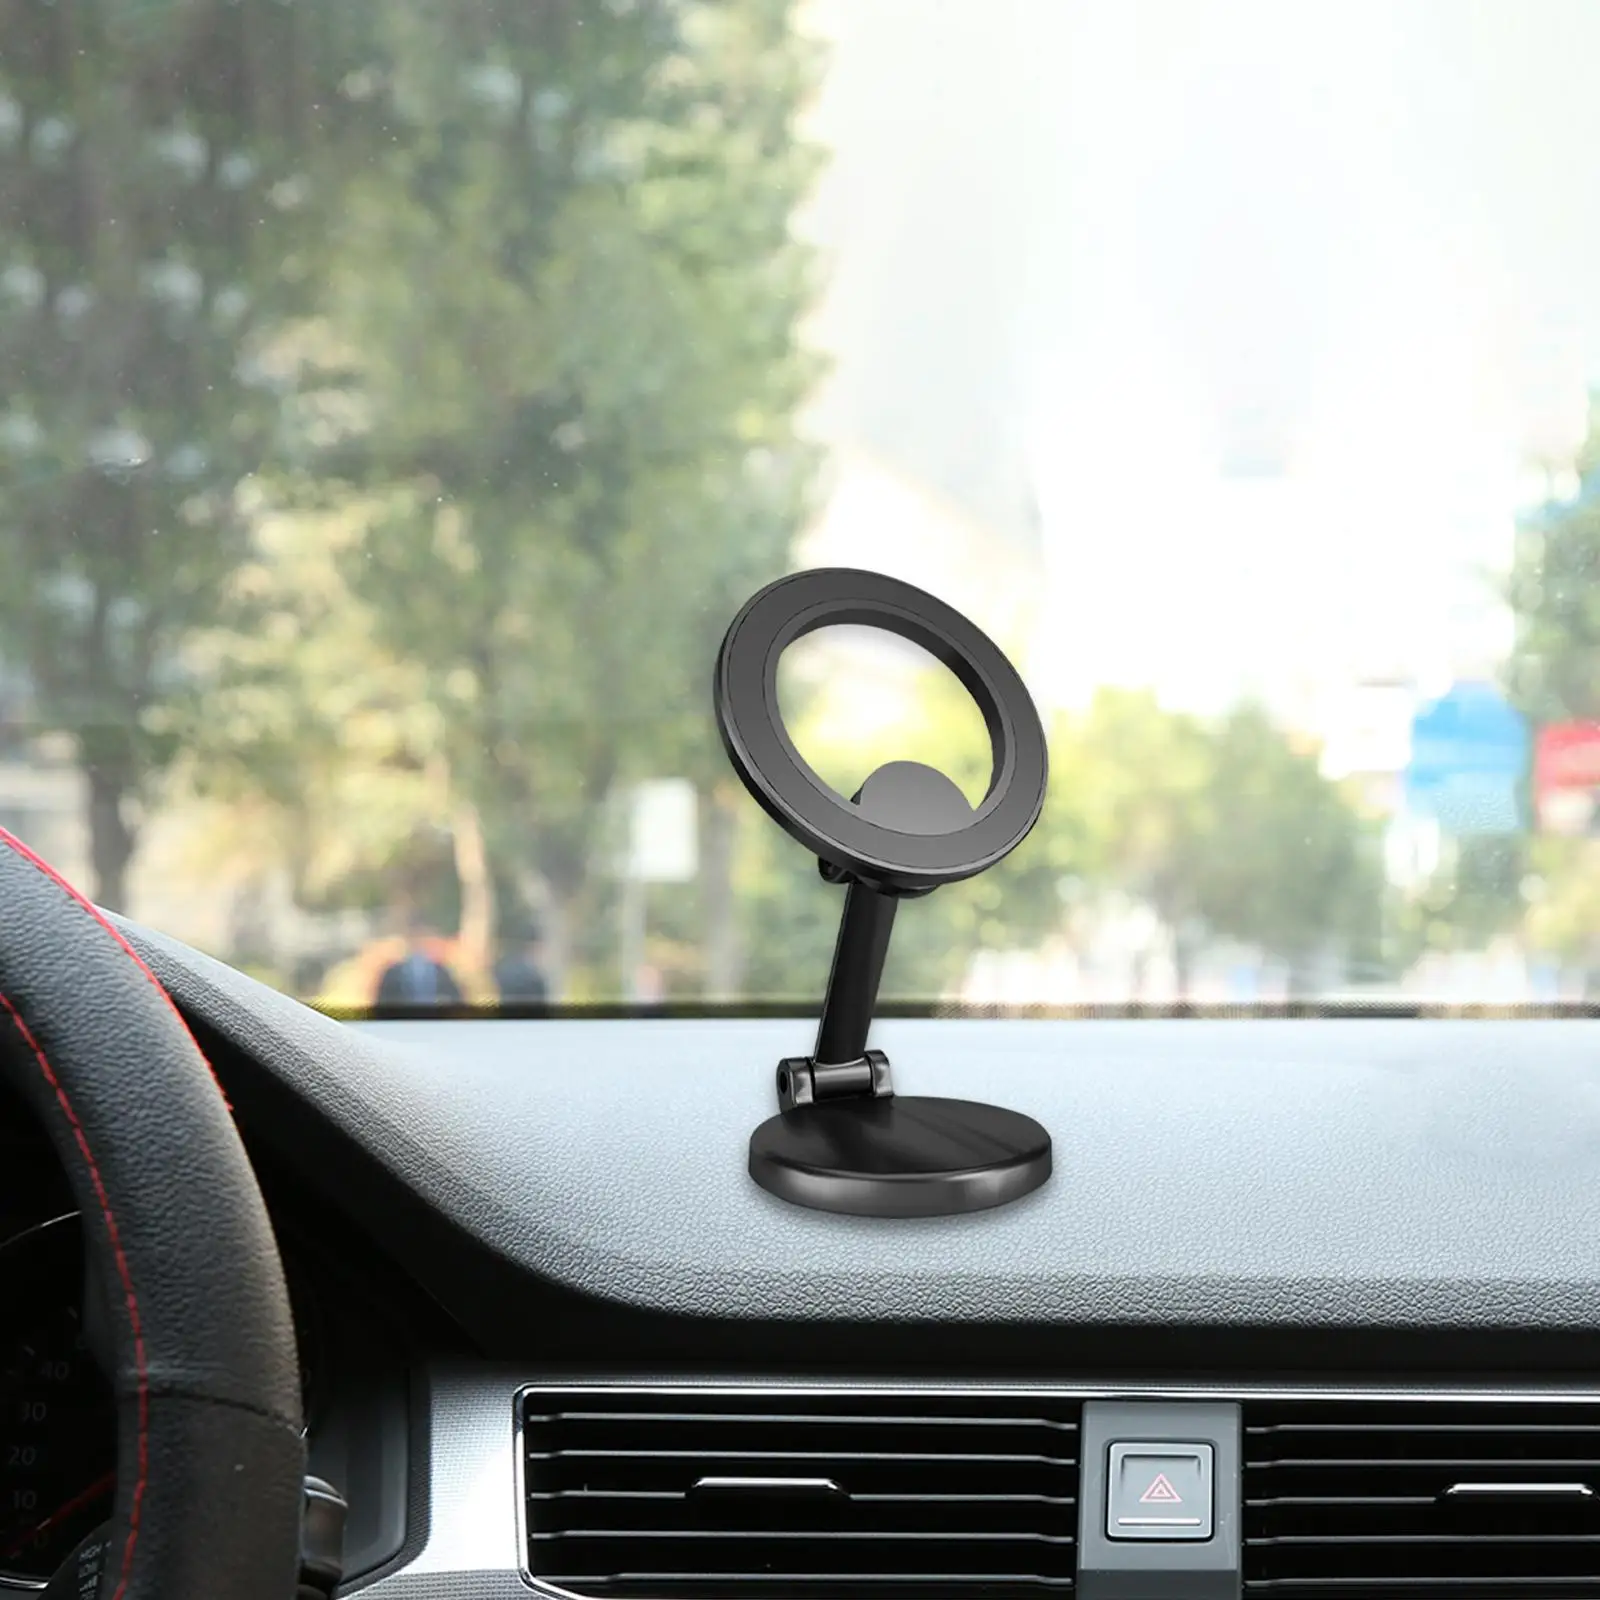 Magnetic Car Phone Mount Foldable Compact Fits Most Smartphones Universal with Metal Plates Automotive Accessories Phone Cradle